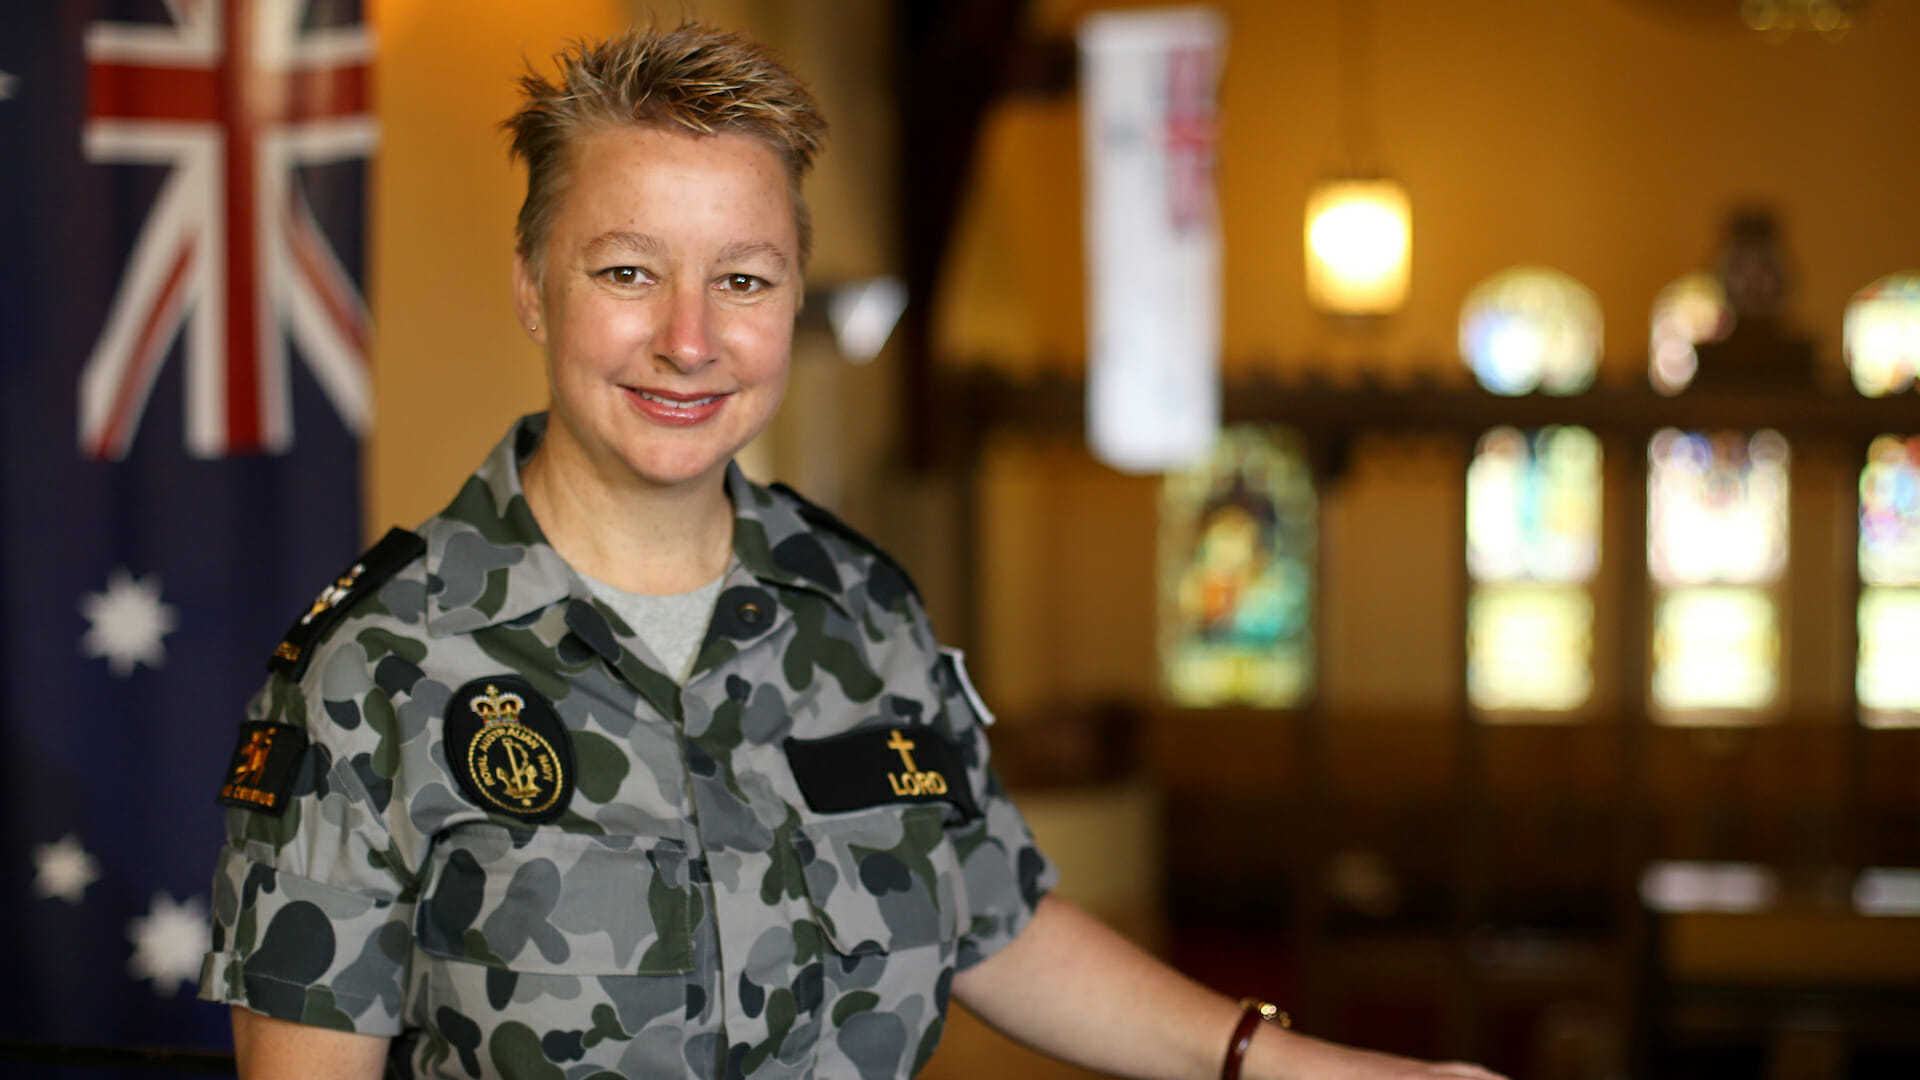 Image of Chaplain Kate Lord, Support Chaplain (Anglican) HMAS Cerberus, Victoria